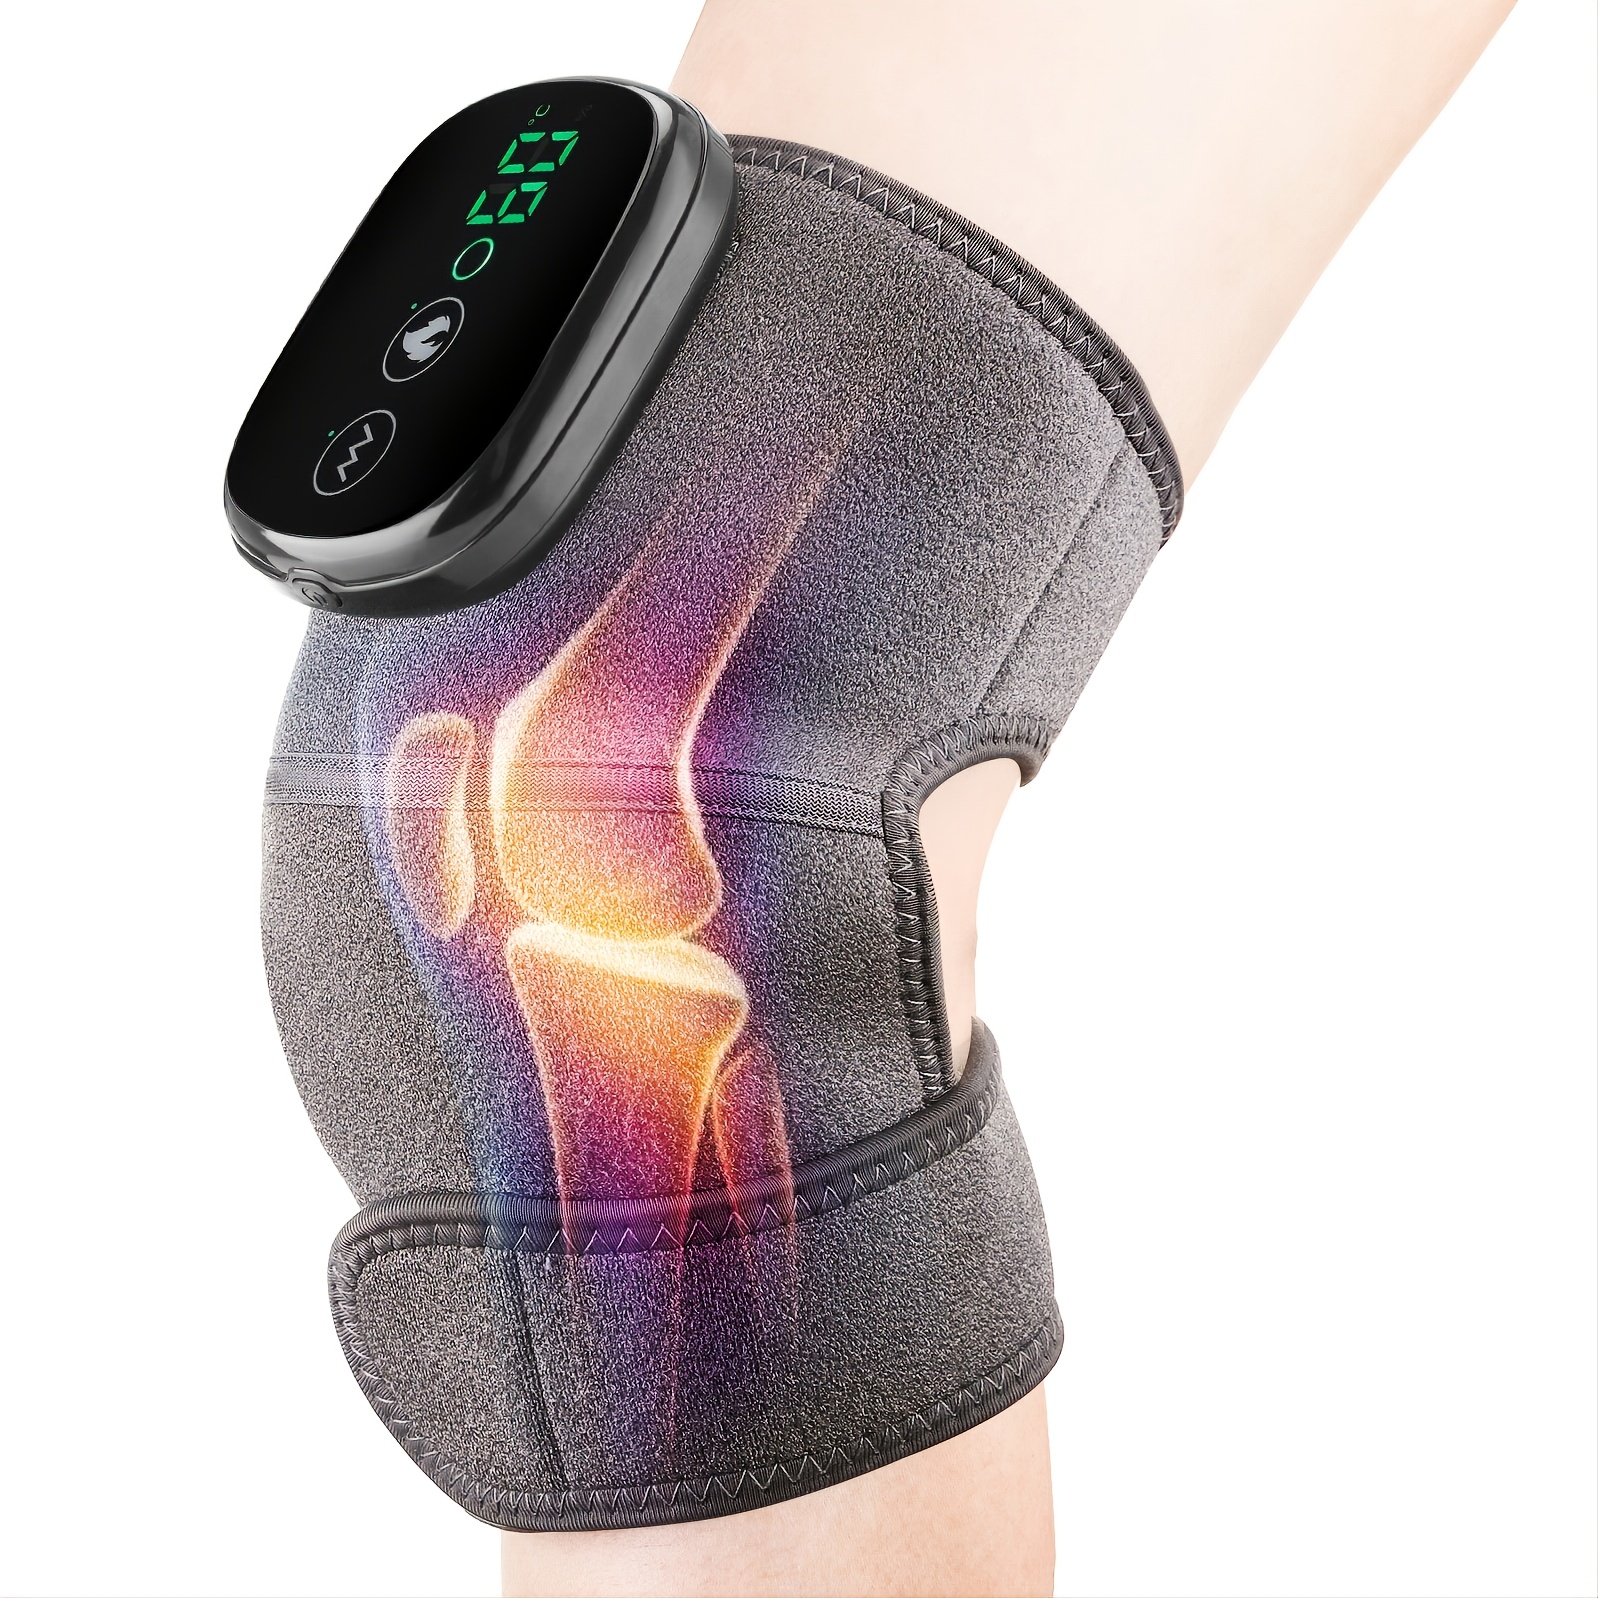 3-in-1 Heated Knee, Elbow, And Shoulder Brace Wrap - Featuring 3 Adjustable  Vibrations And Heating Modes!